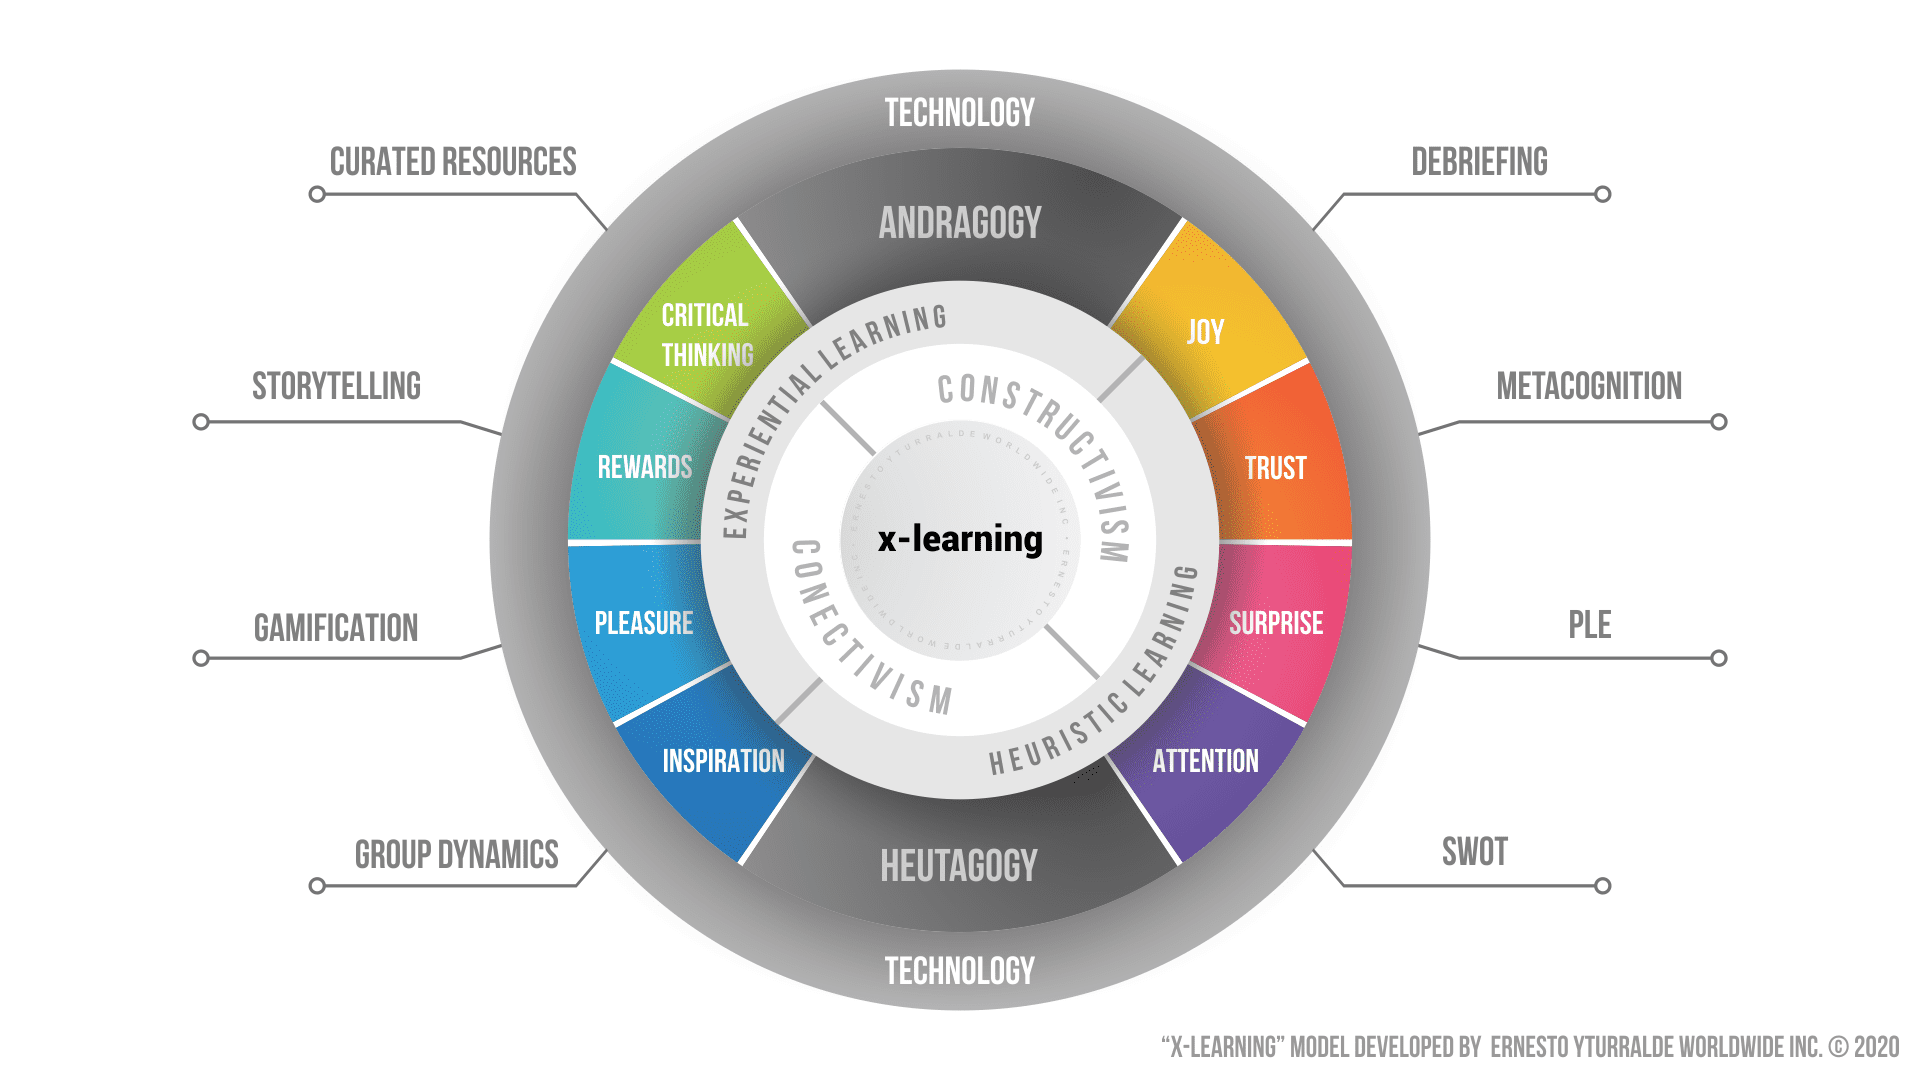 x-learning: Teaching-Learning Process Model digitally applying Experiential Learning